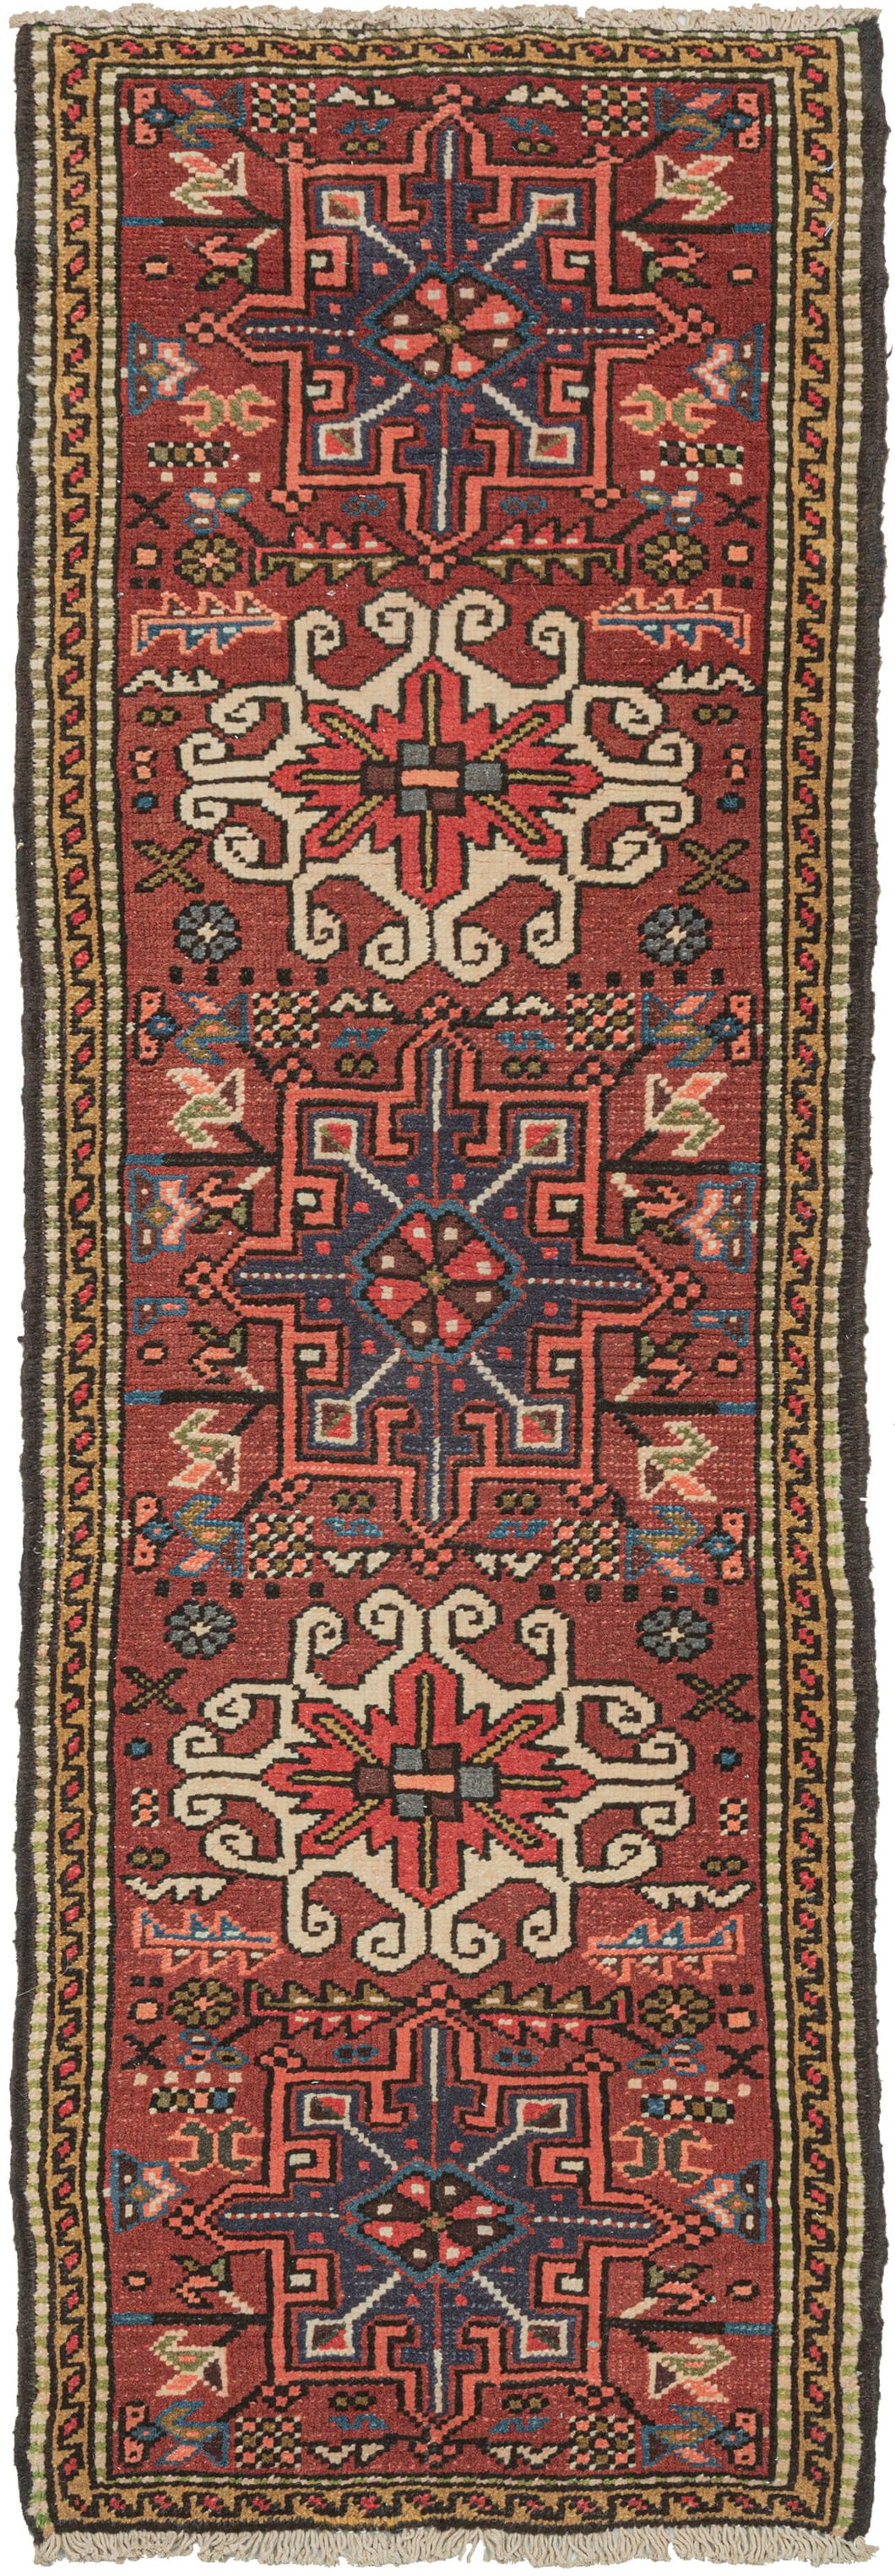 Vintage small Karaja runner featuring a pattern of alternating geometric shapes and hooked lozenges on a brownish-red ground. The ivory-hooked lozenges have a little more of an extra curl here giving it some distinct personality. Blues, purple, charcoal, gold, pink, and ivory complete the palette. In a rare narrow and short runner format.